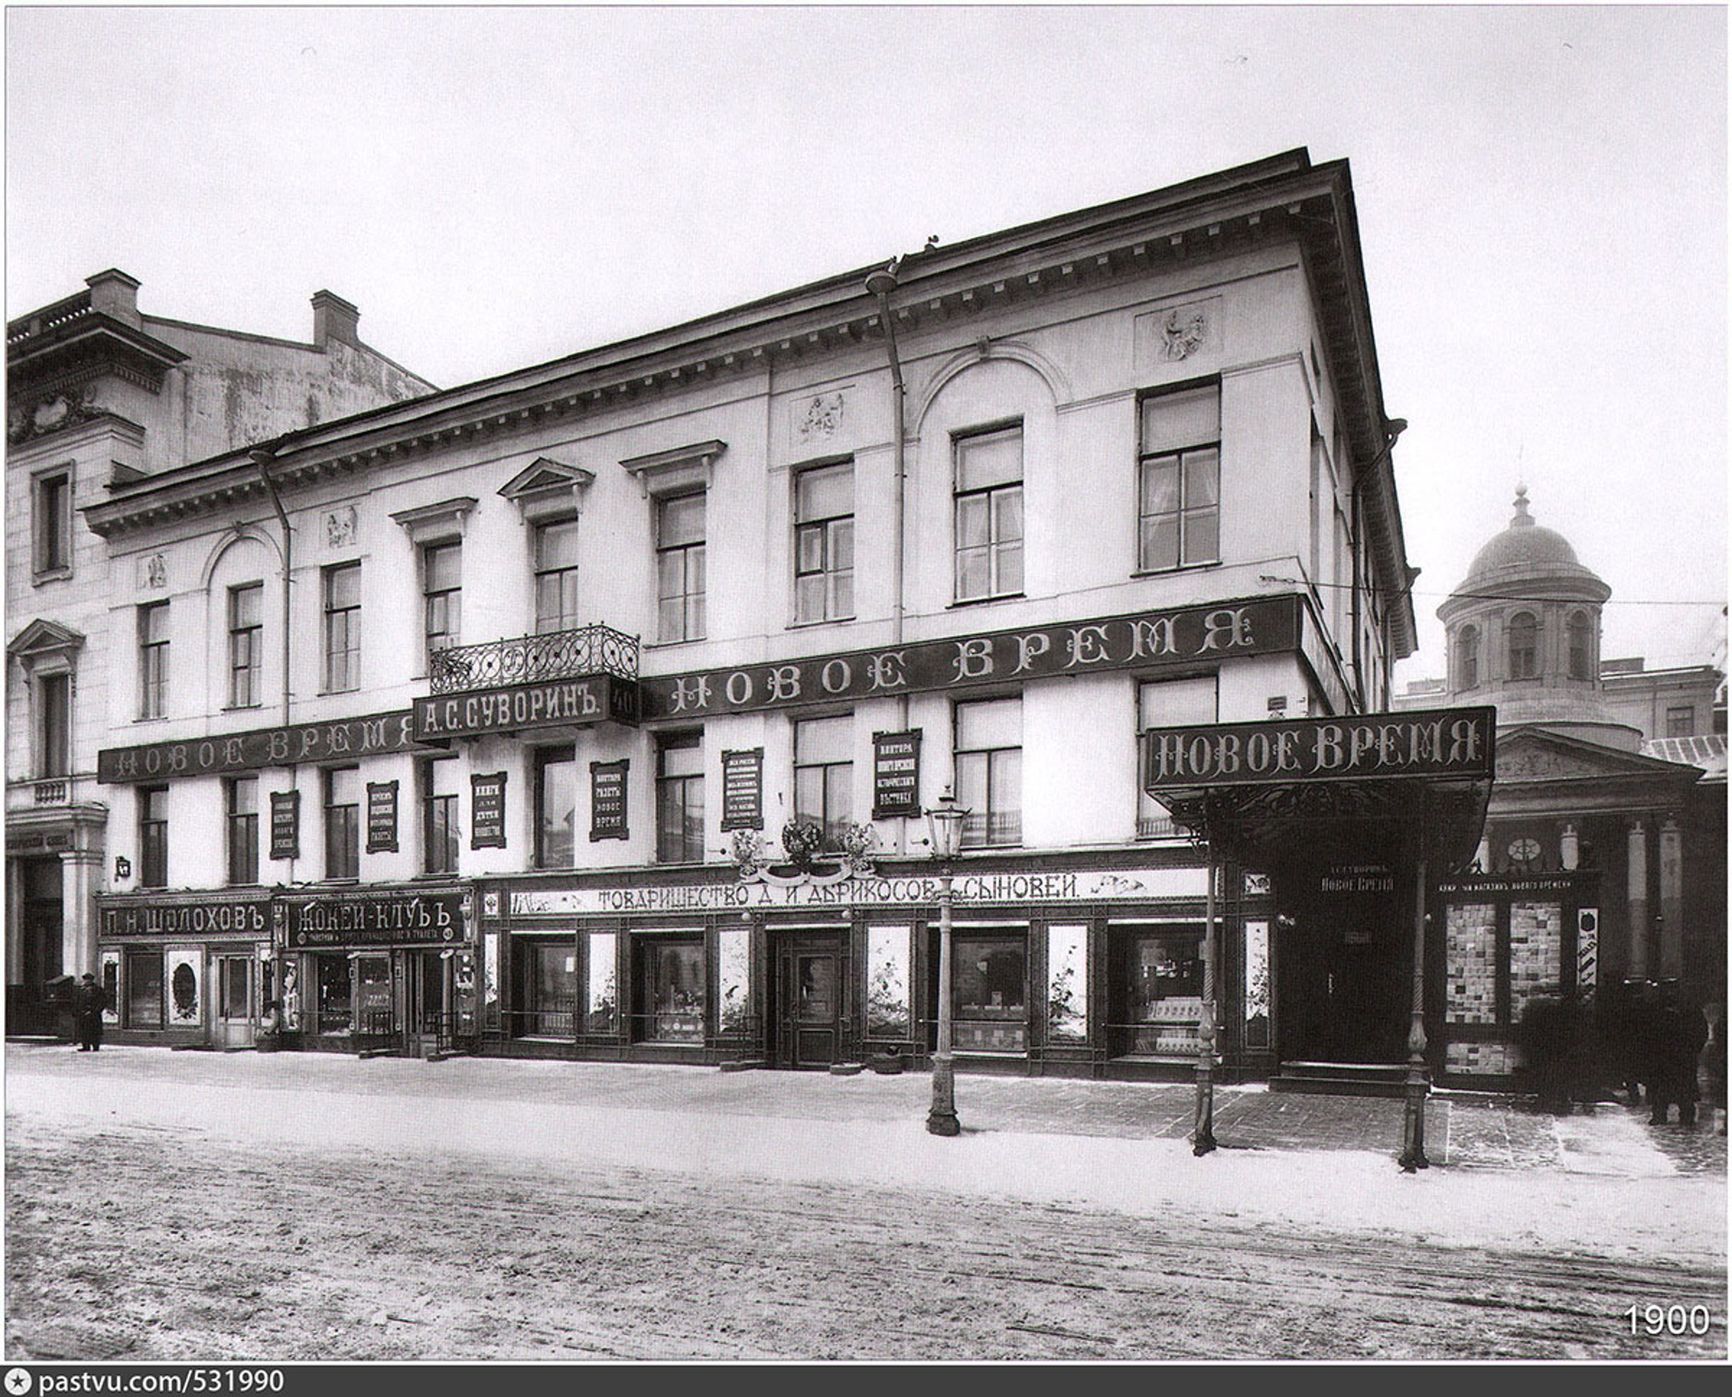 One of the stores of the Abrikosov and Sons Partnership in Moscow